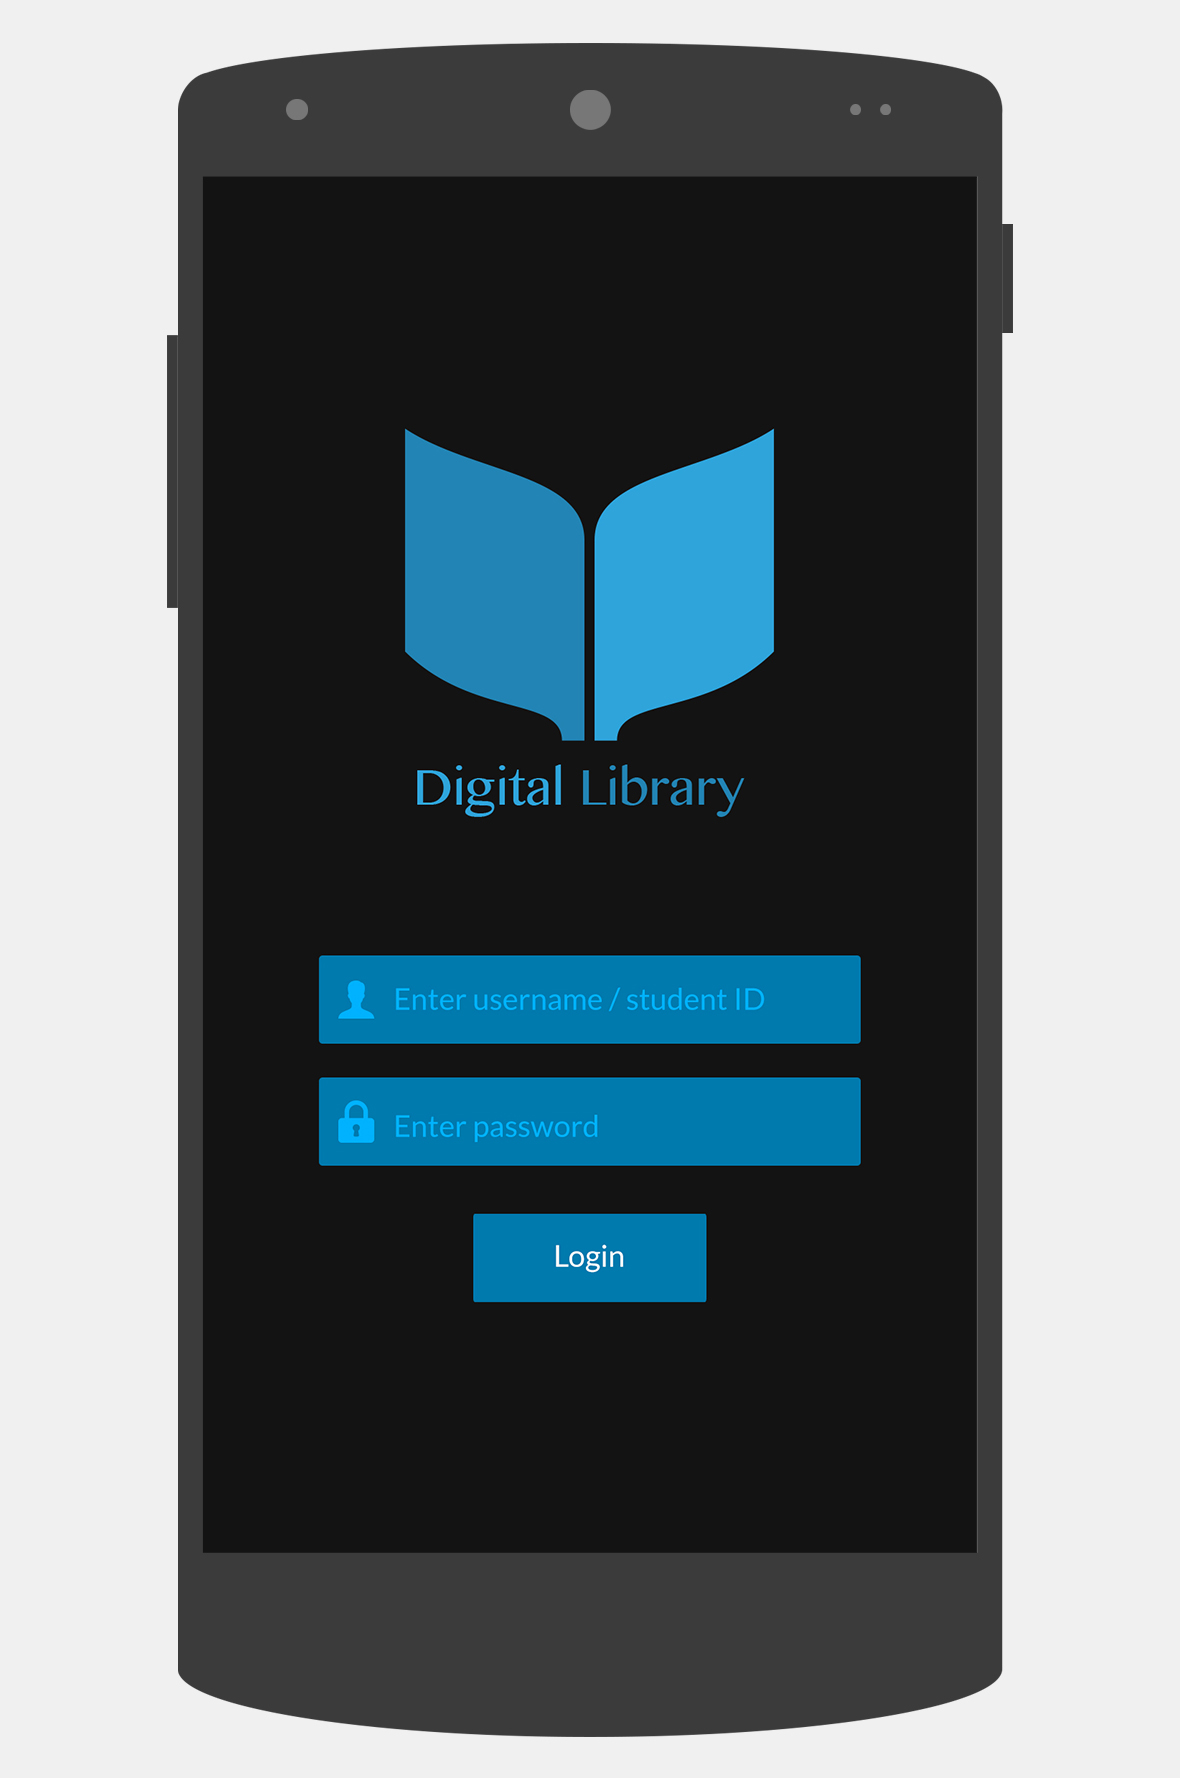 iPad android Android Wear library books information design student app freebie psd